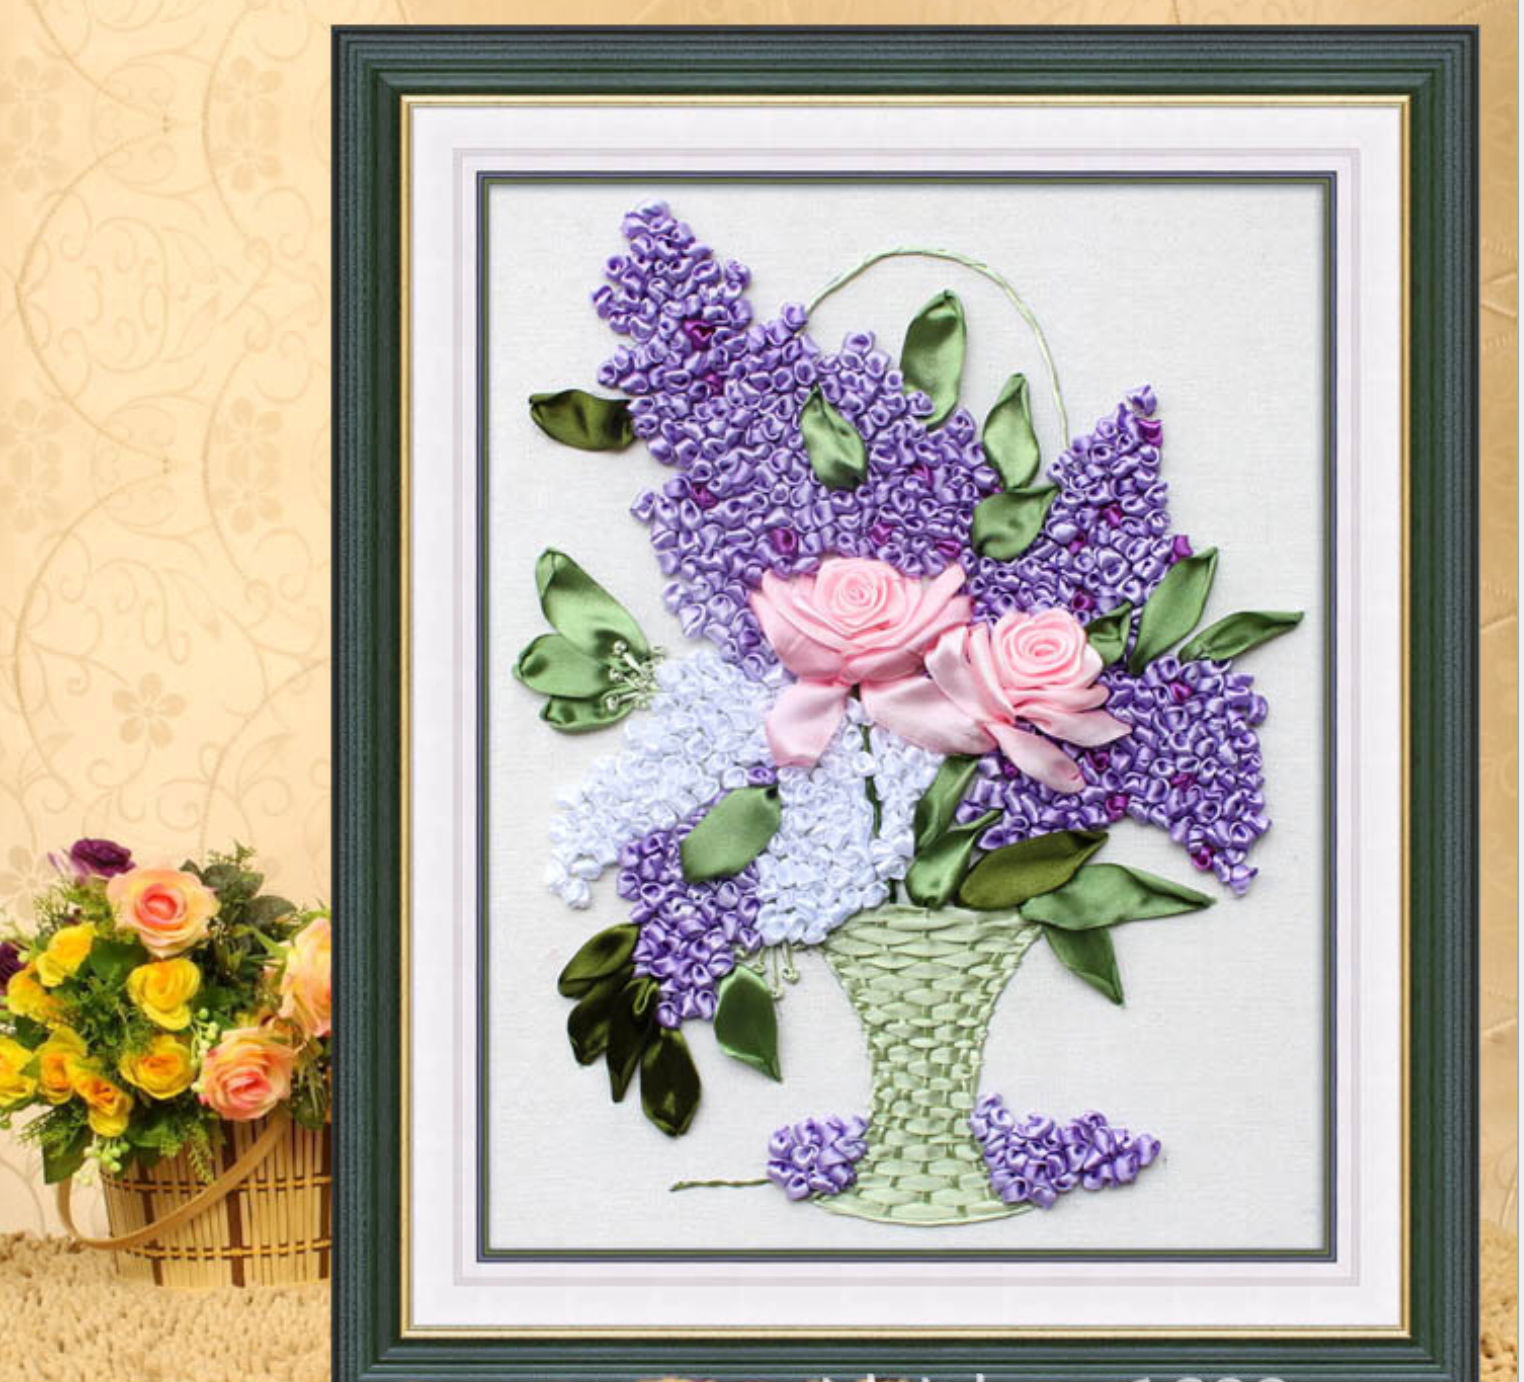 Ribbon Hand Embroidery Patterns Flower Basket Diy Ribbon Hand Embroidery Kit Marked Pattern Cotton Home Decor 55x45cm